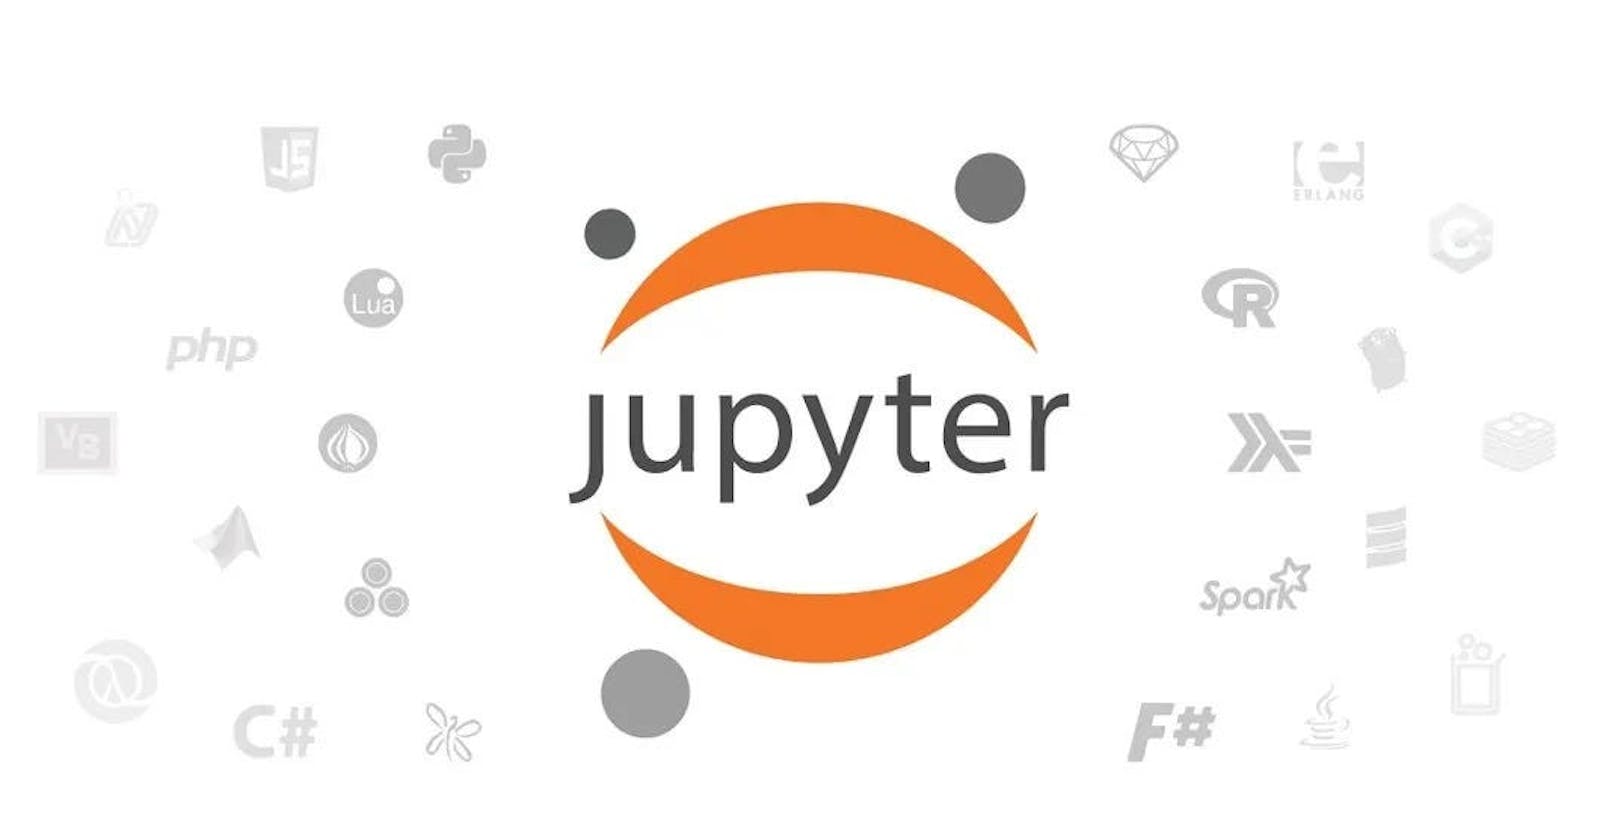 How To Get Jupyter Python Notebook On AWS(Amazon Web Services)